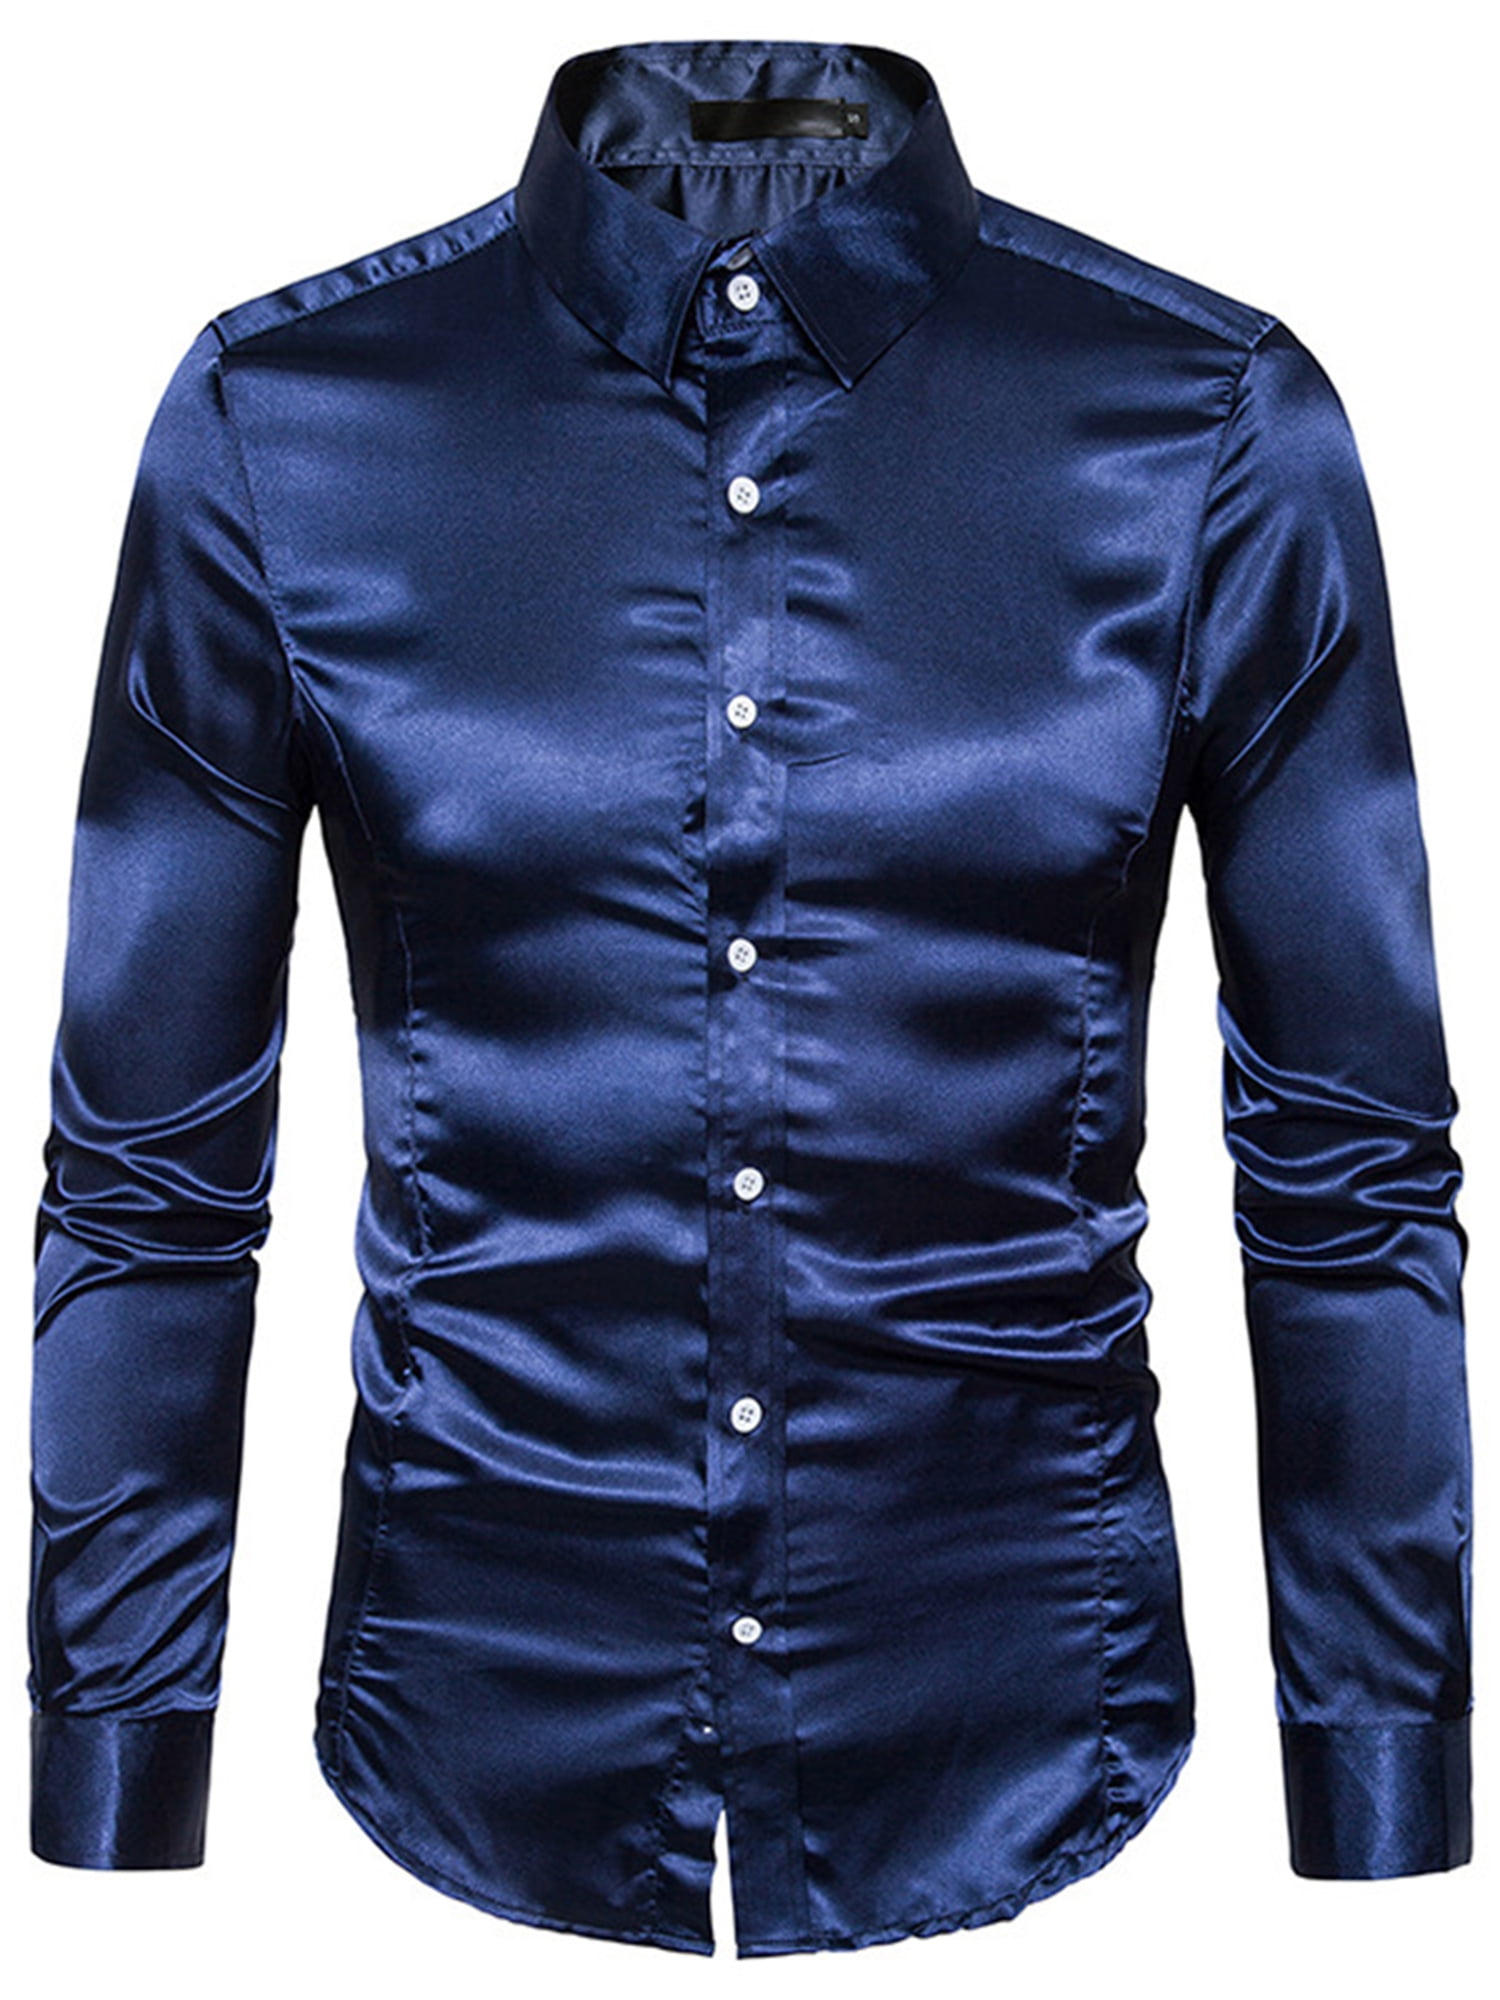 Men's Long Sleeve Satin Dress Shirt Solid Slim Fit Casual Business ...